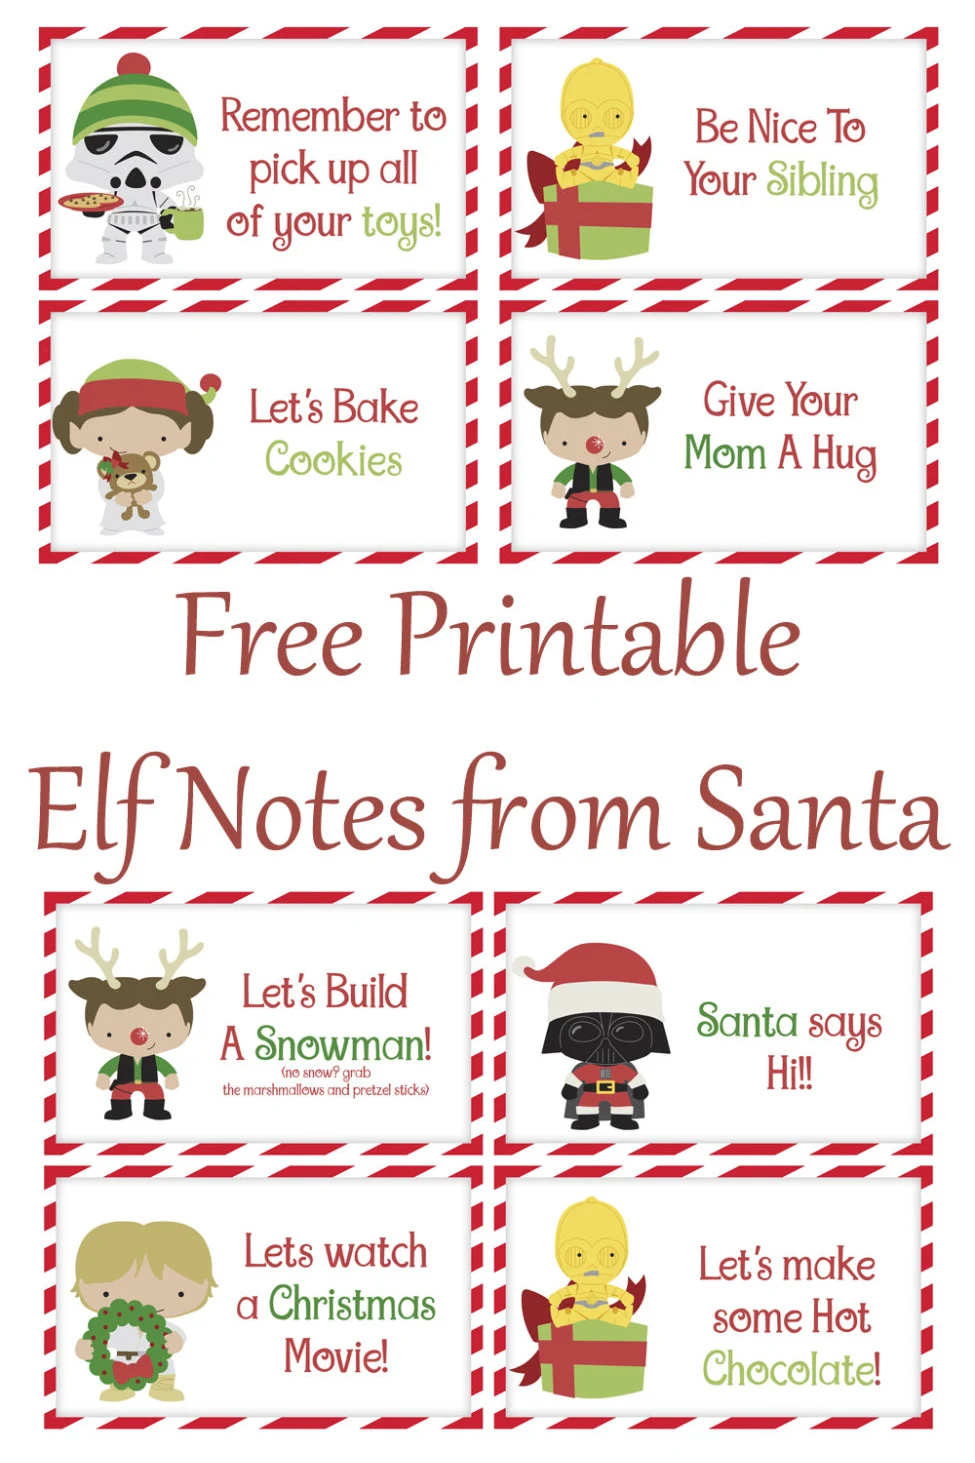 Keep the holidays positive and stress free with these free printable, Star Wars themed, Elf Notes from Santa.